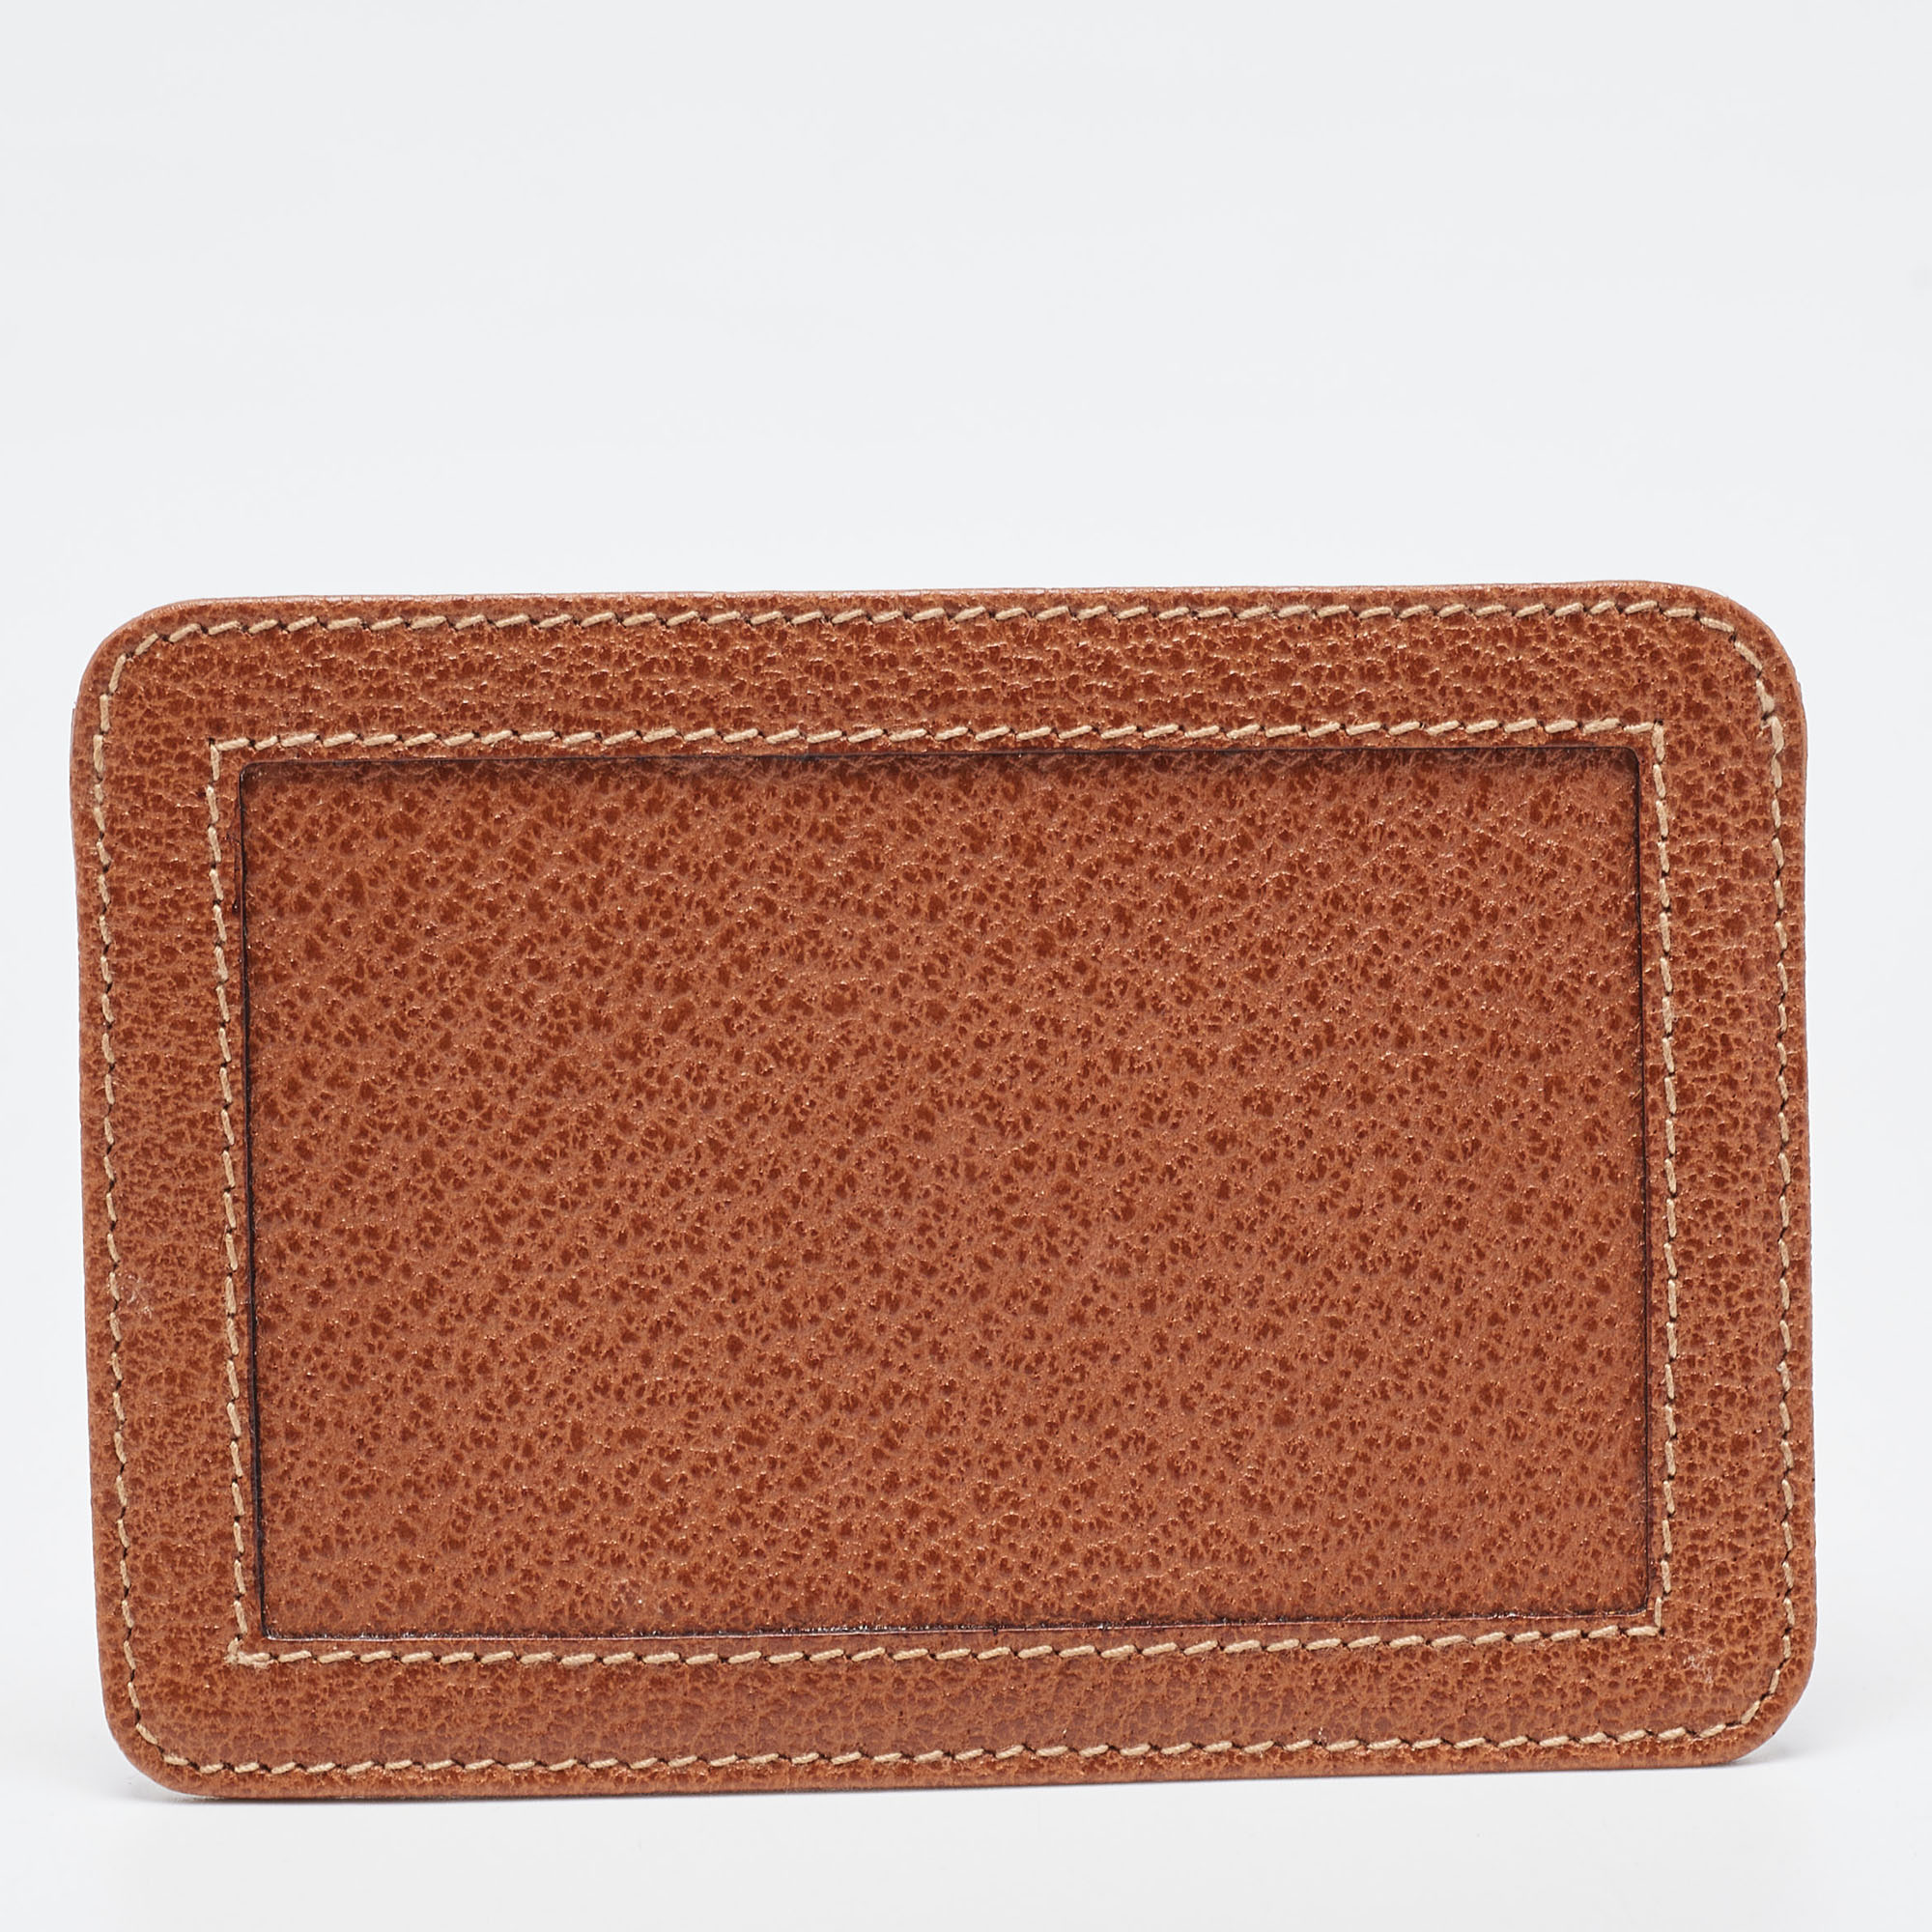 Gucci Brown Leather Card Holder